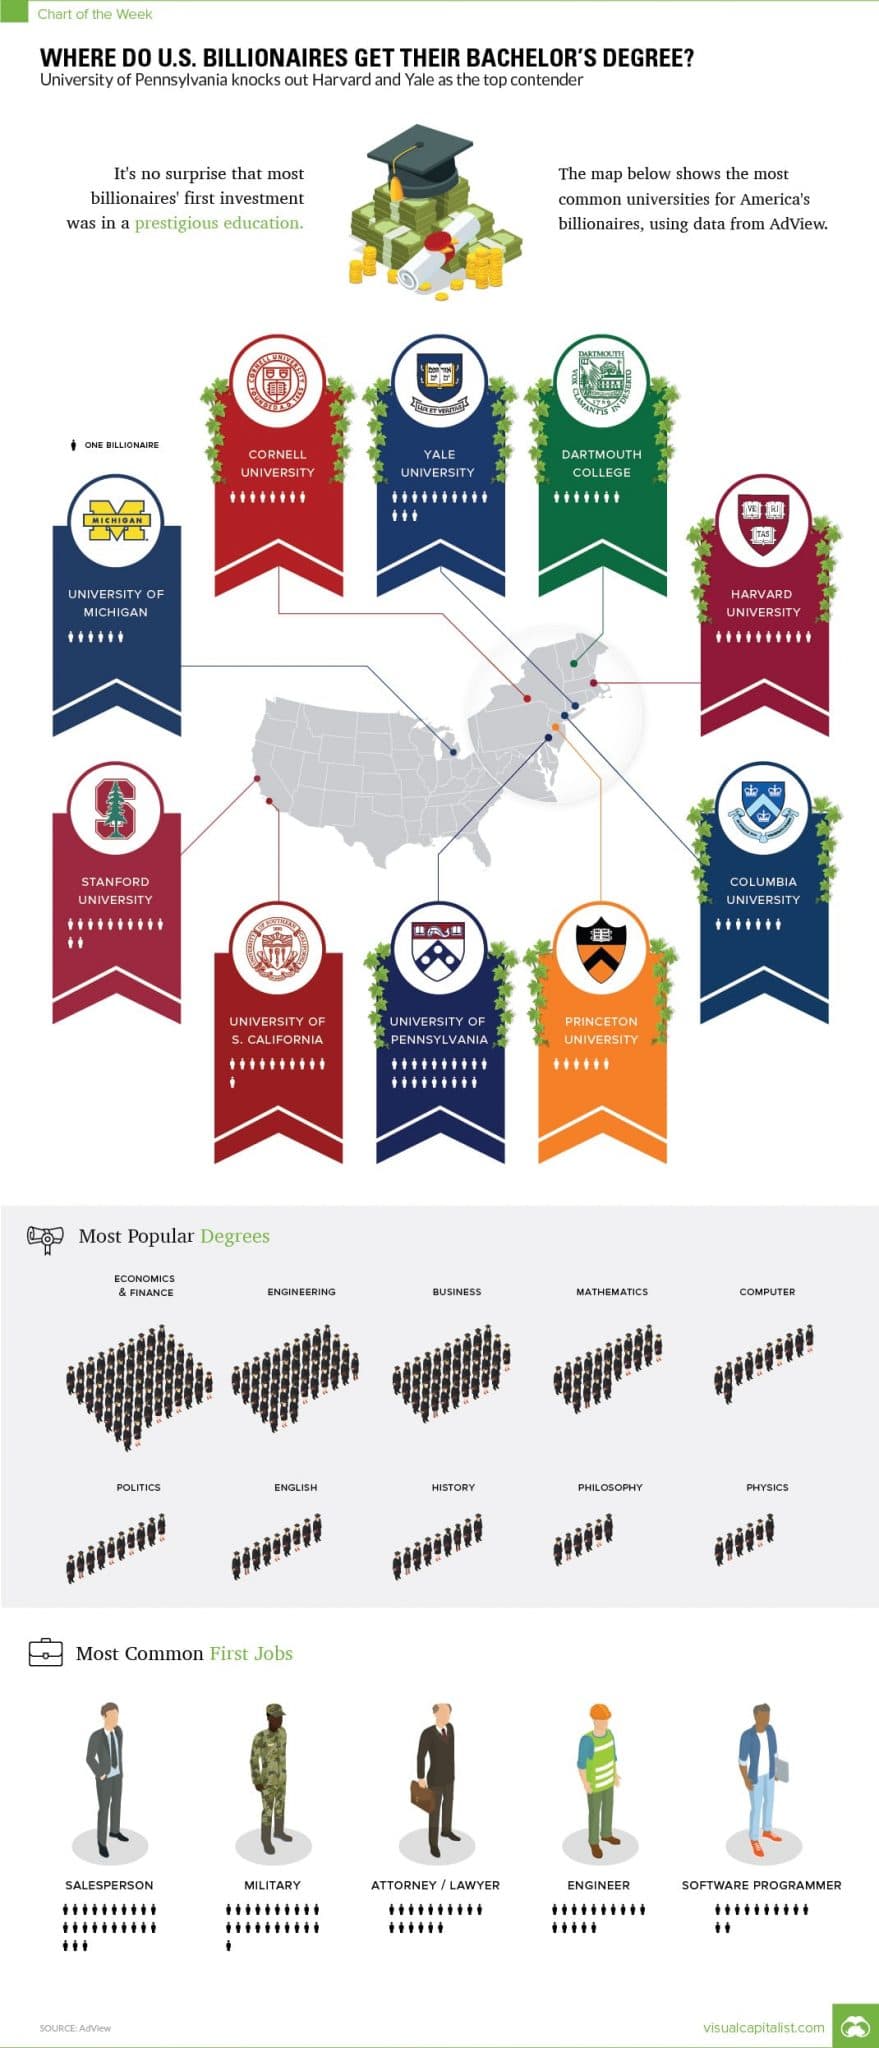 Where most American billionaires get their first university degree from and what they study, including their first job roles. Statistics and data infographic.